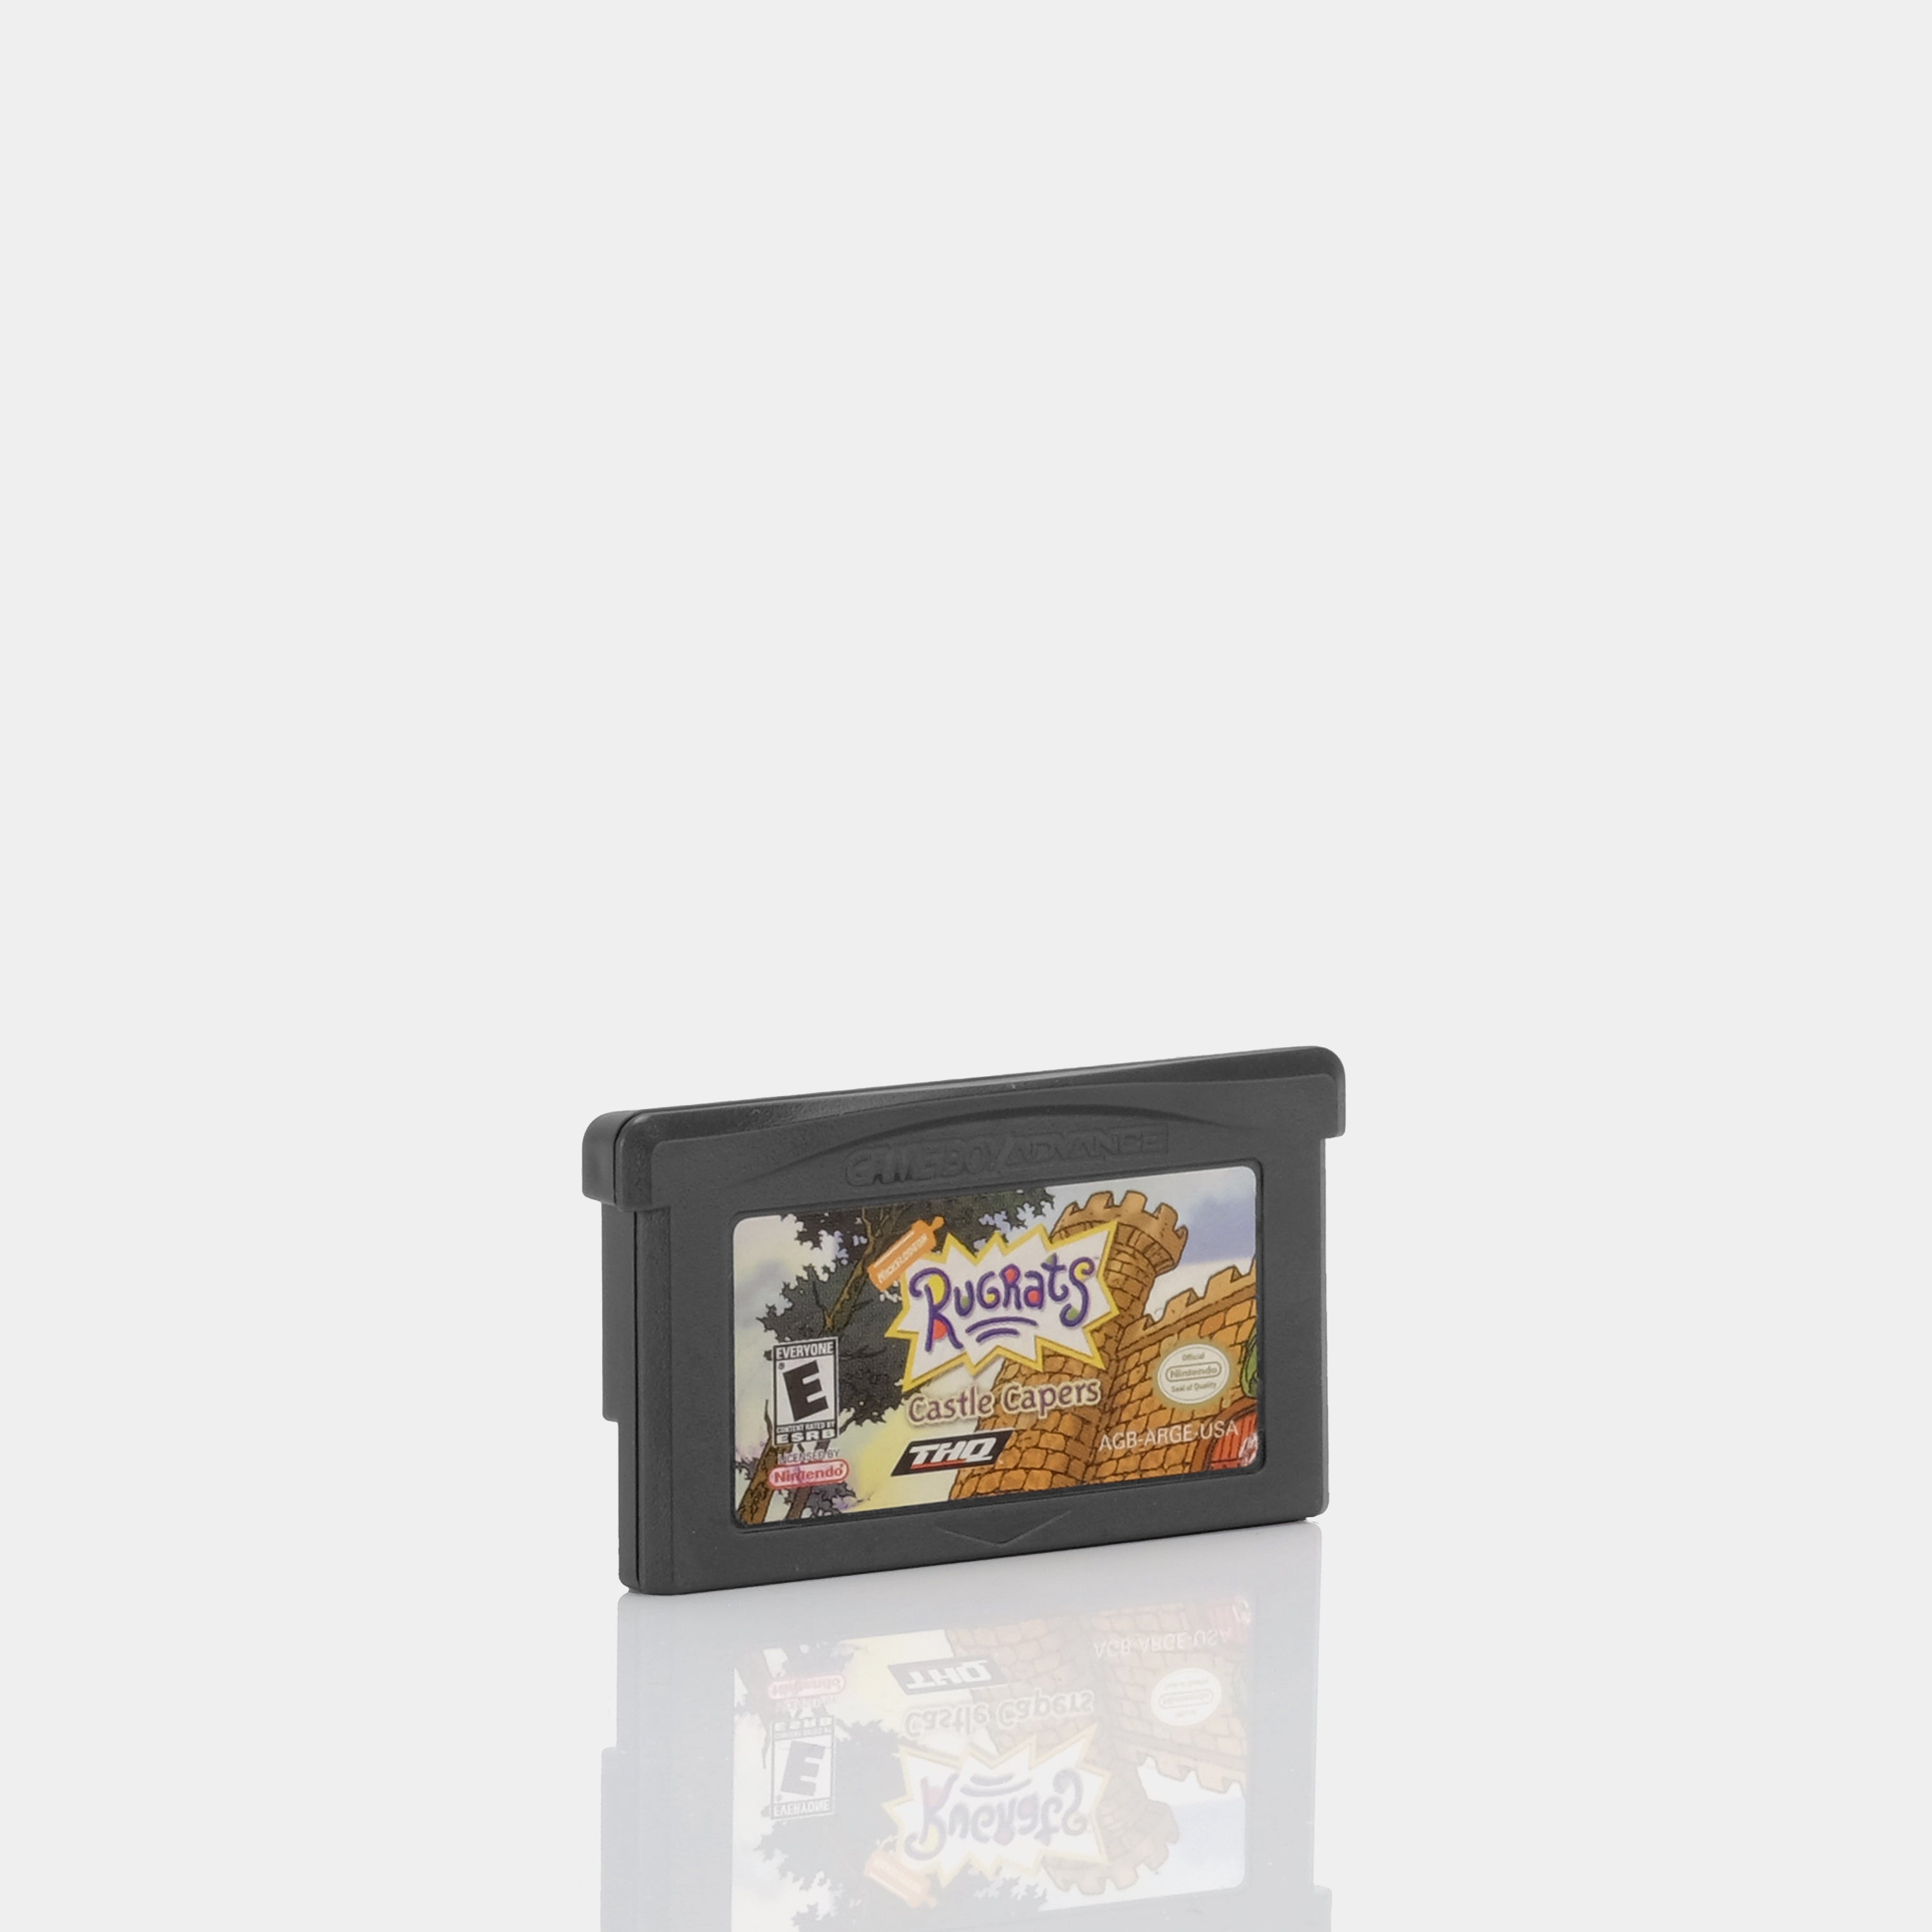 Rugrats: Castle Capers Game Boy Advance Game